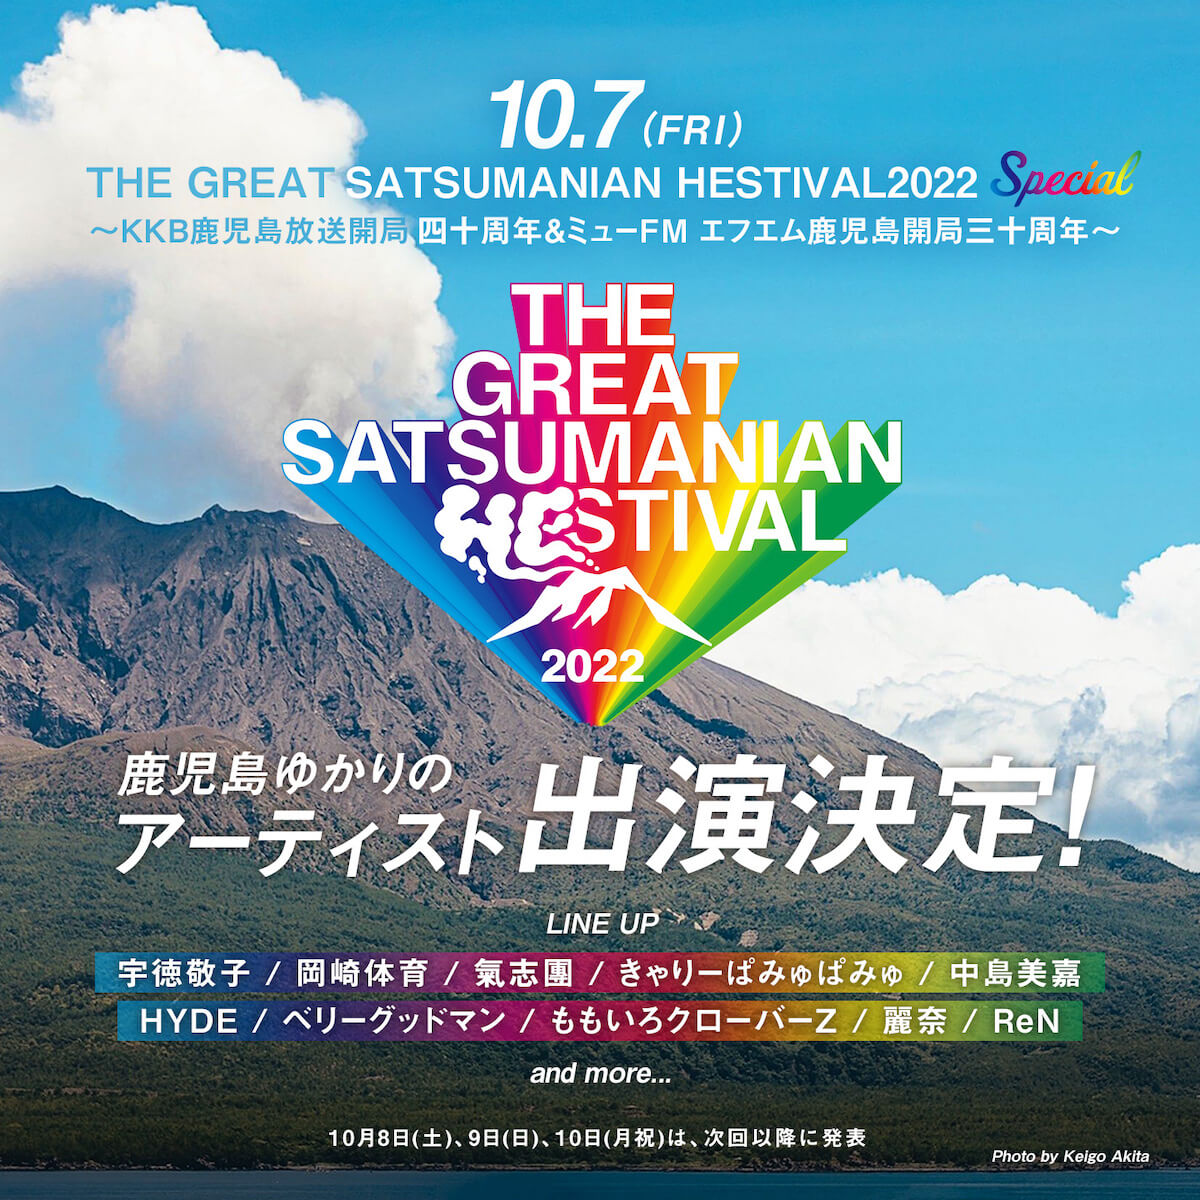 THE GREAT SATSUMANIAN HESTIVAL 2022 SPECIAL 出演者発表！チケット先行受付開始！